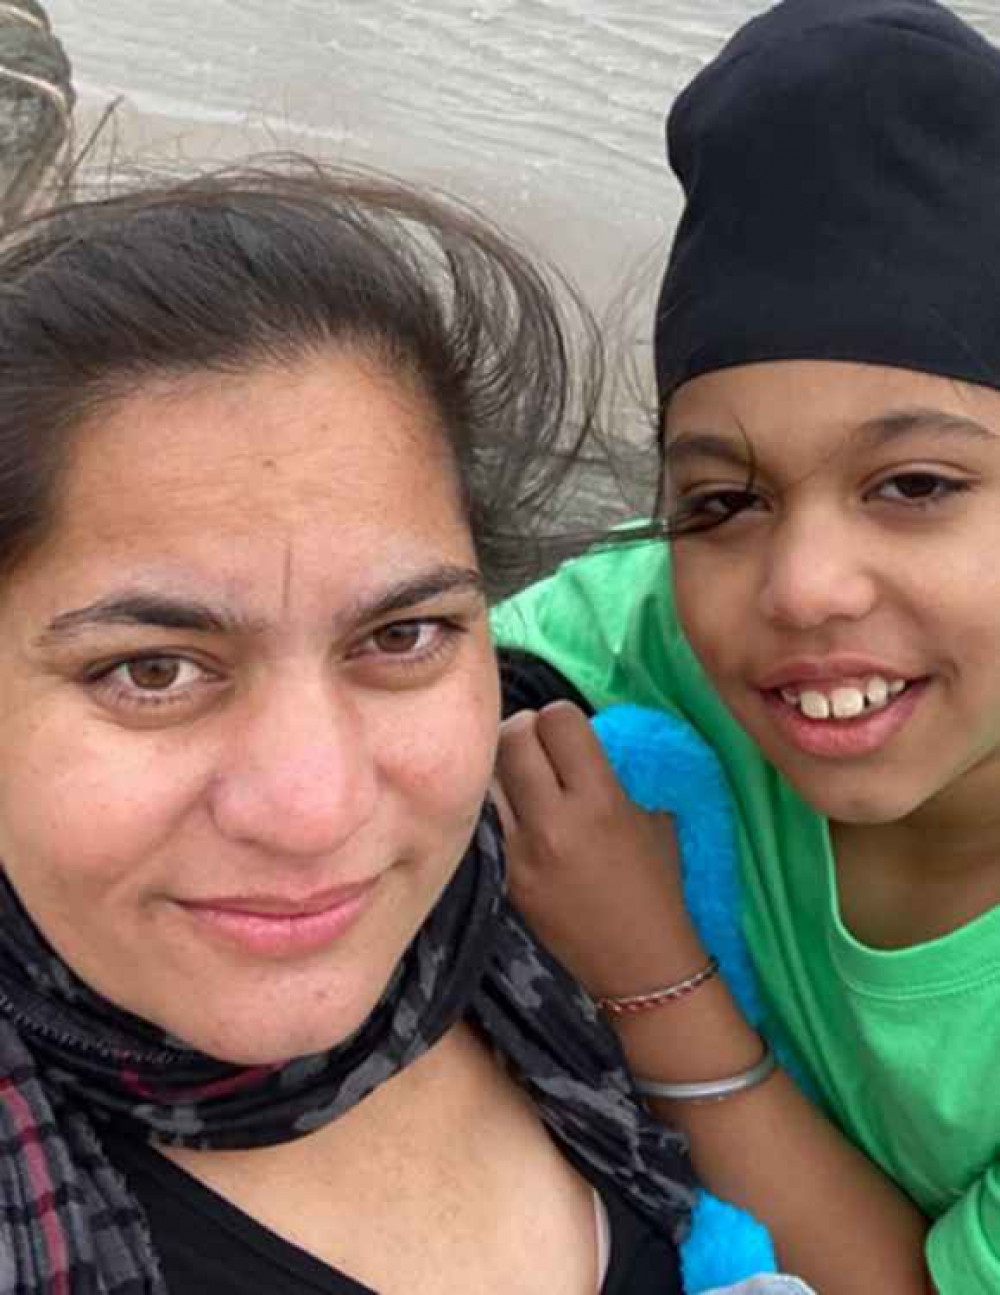 Sohandeep Kaur and her son Guriot were last seen on April 12. Image Credit: Ealing Police